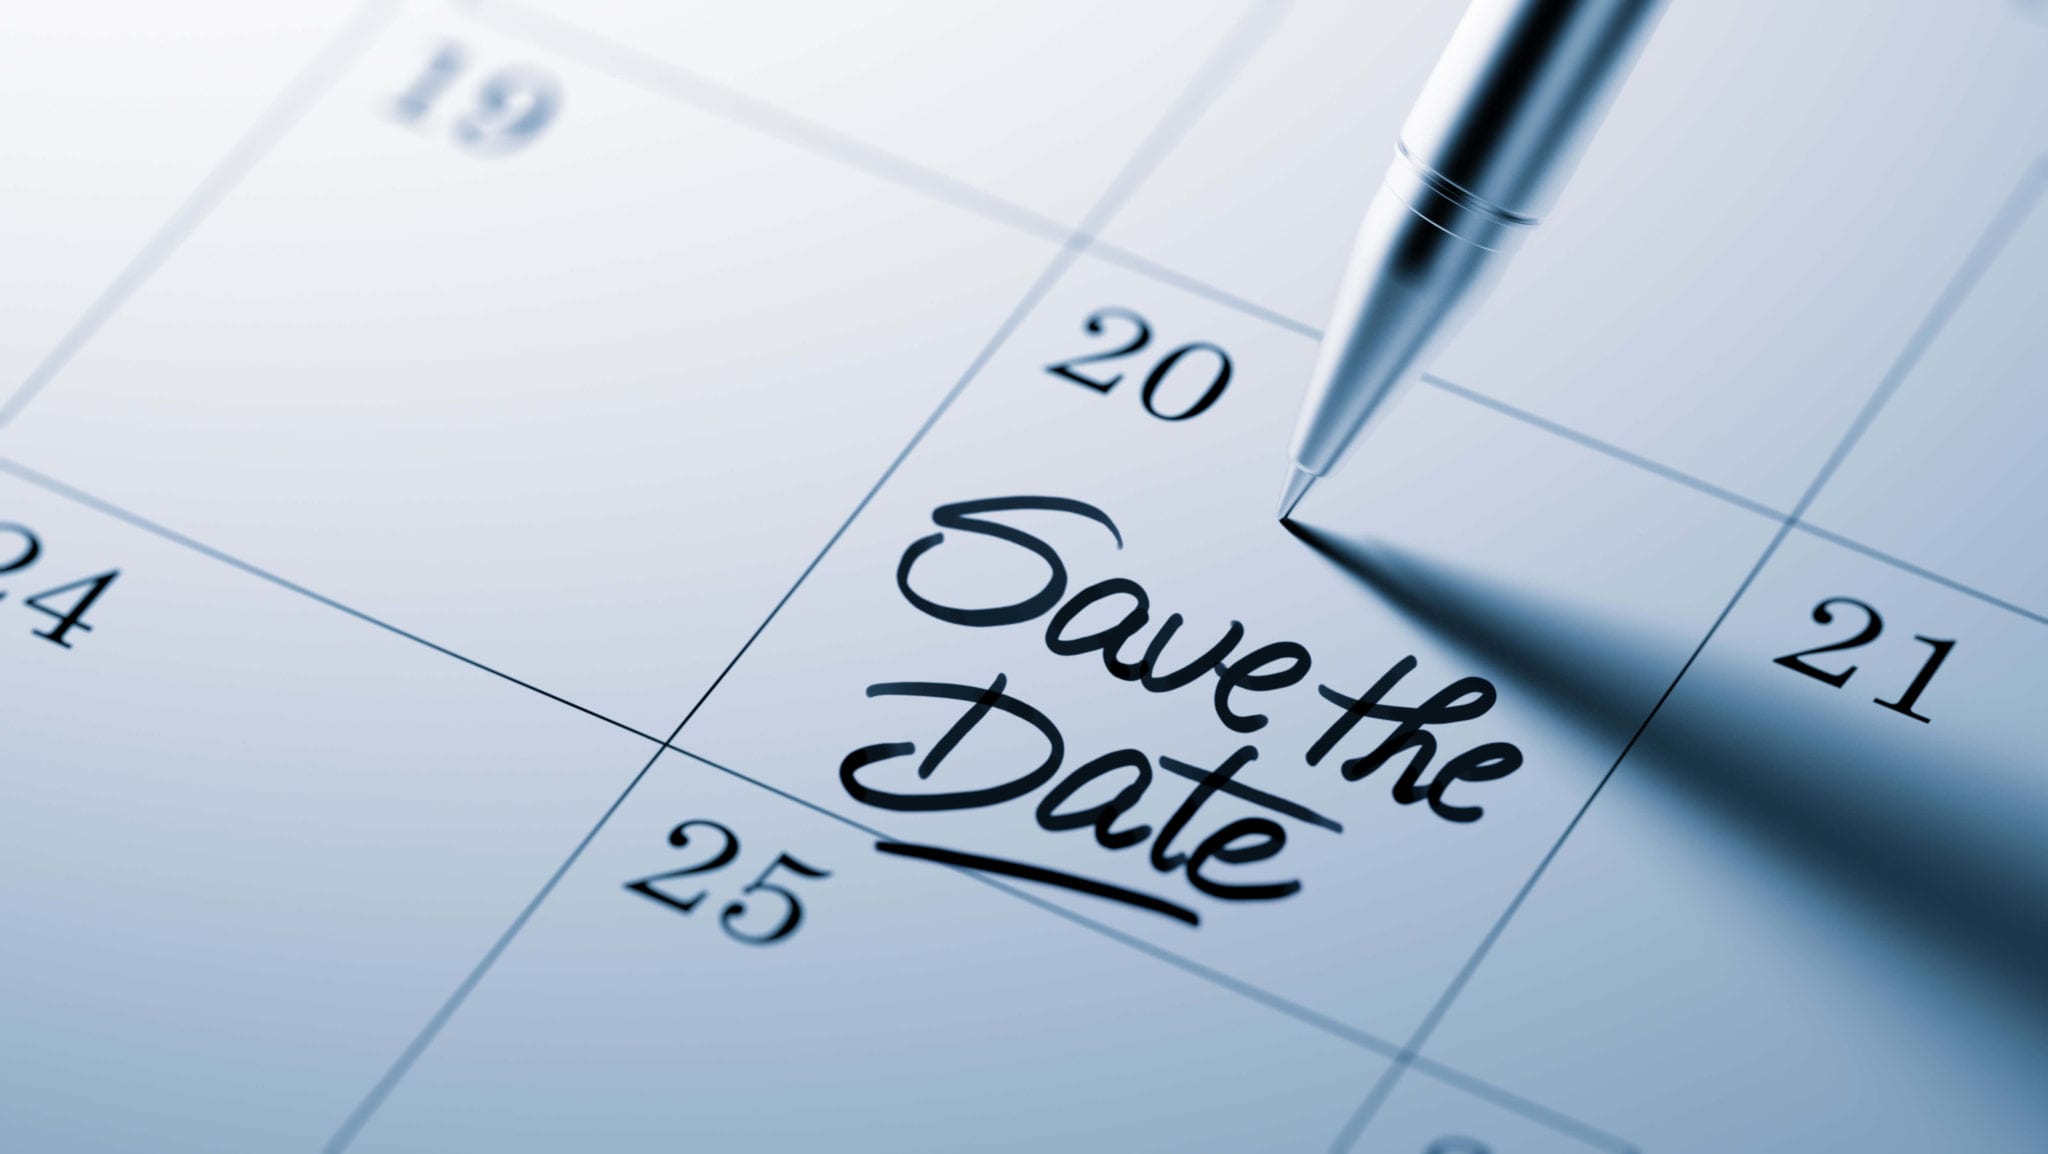 save the date image